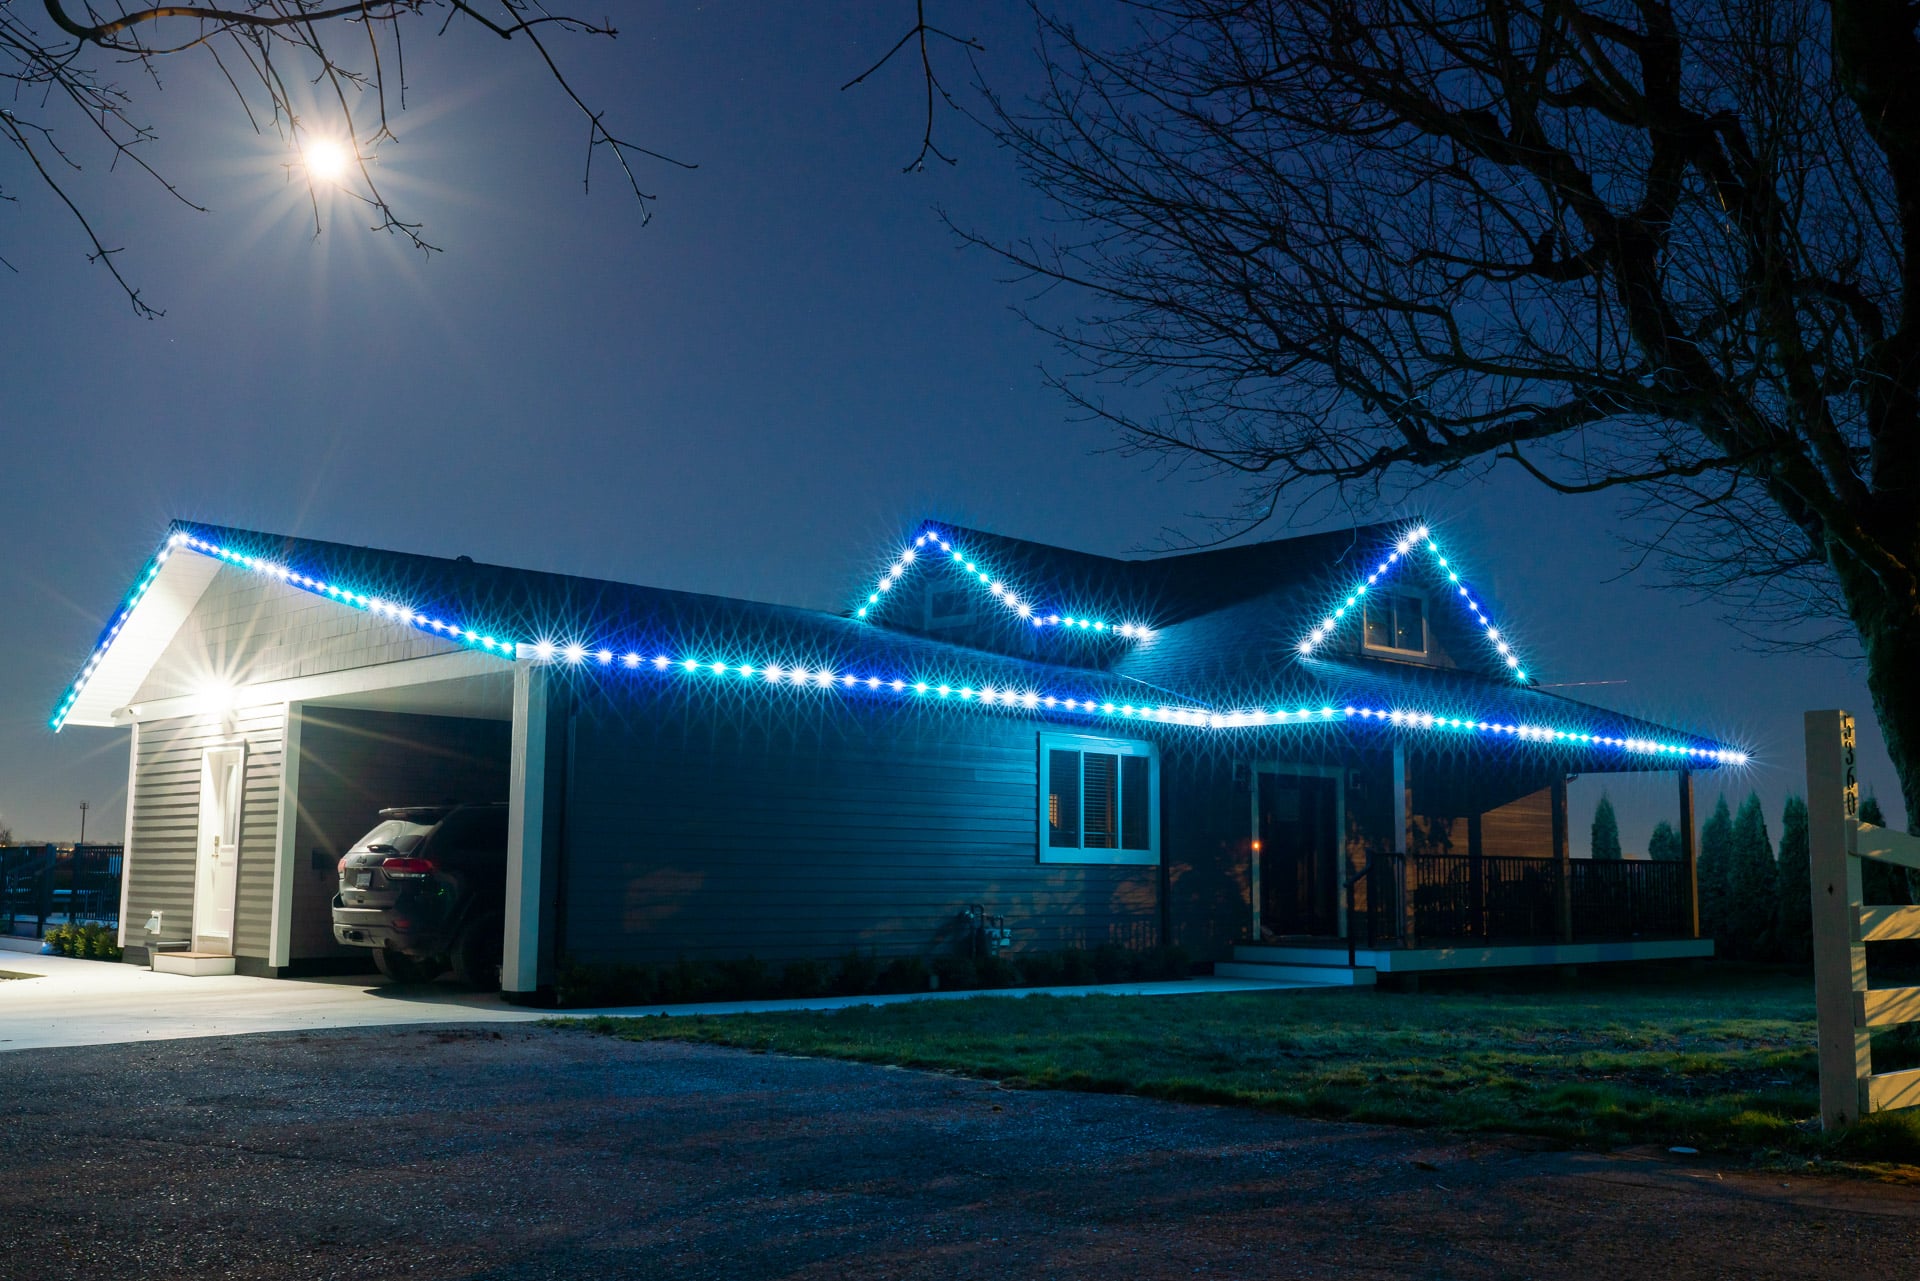 A house is lit up with Blue, white and green Chromaglow lights for permanent outdoor lighting